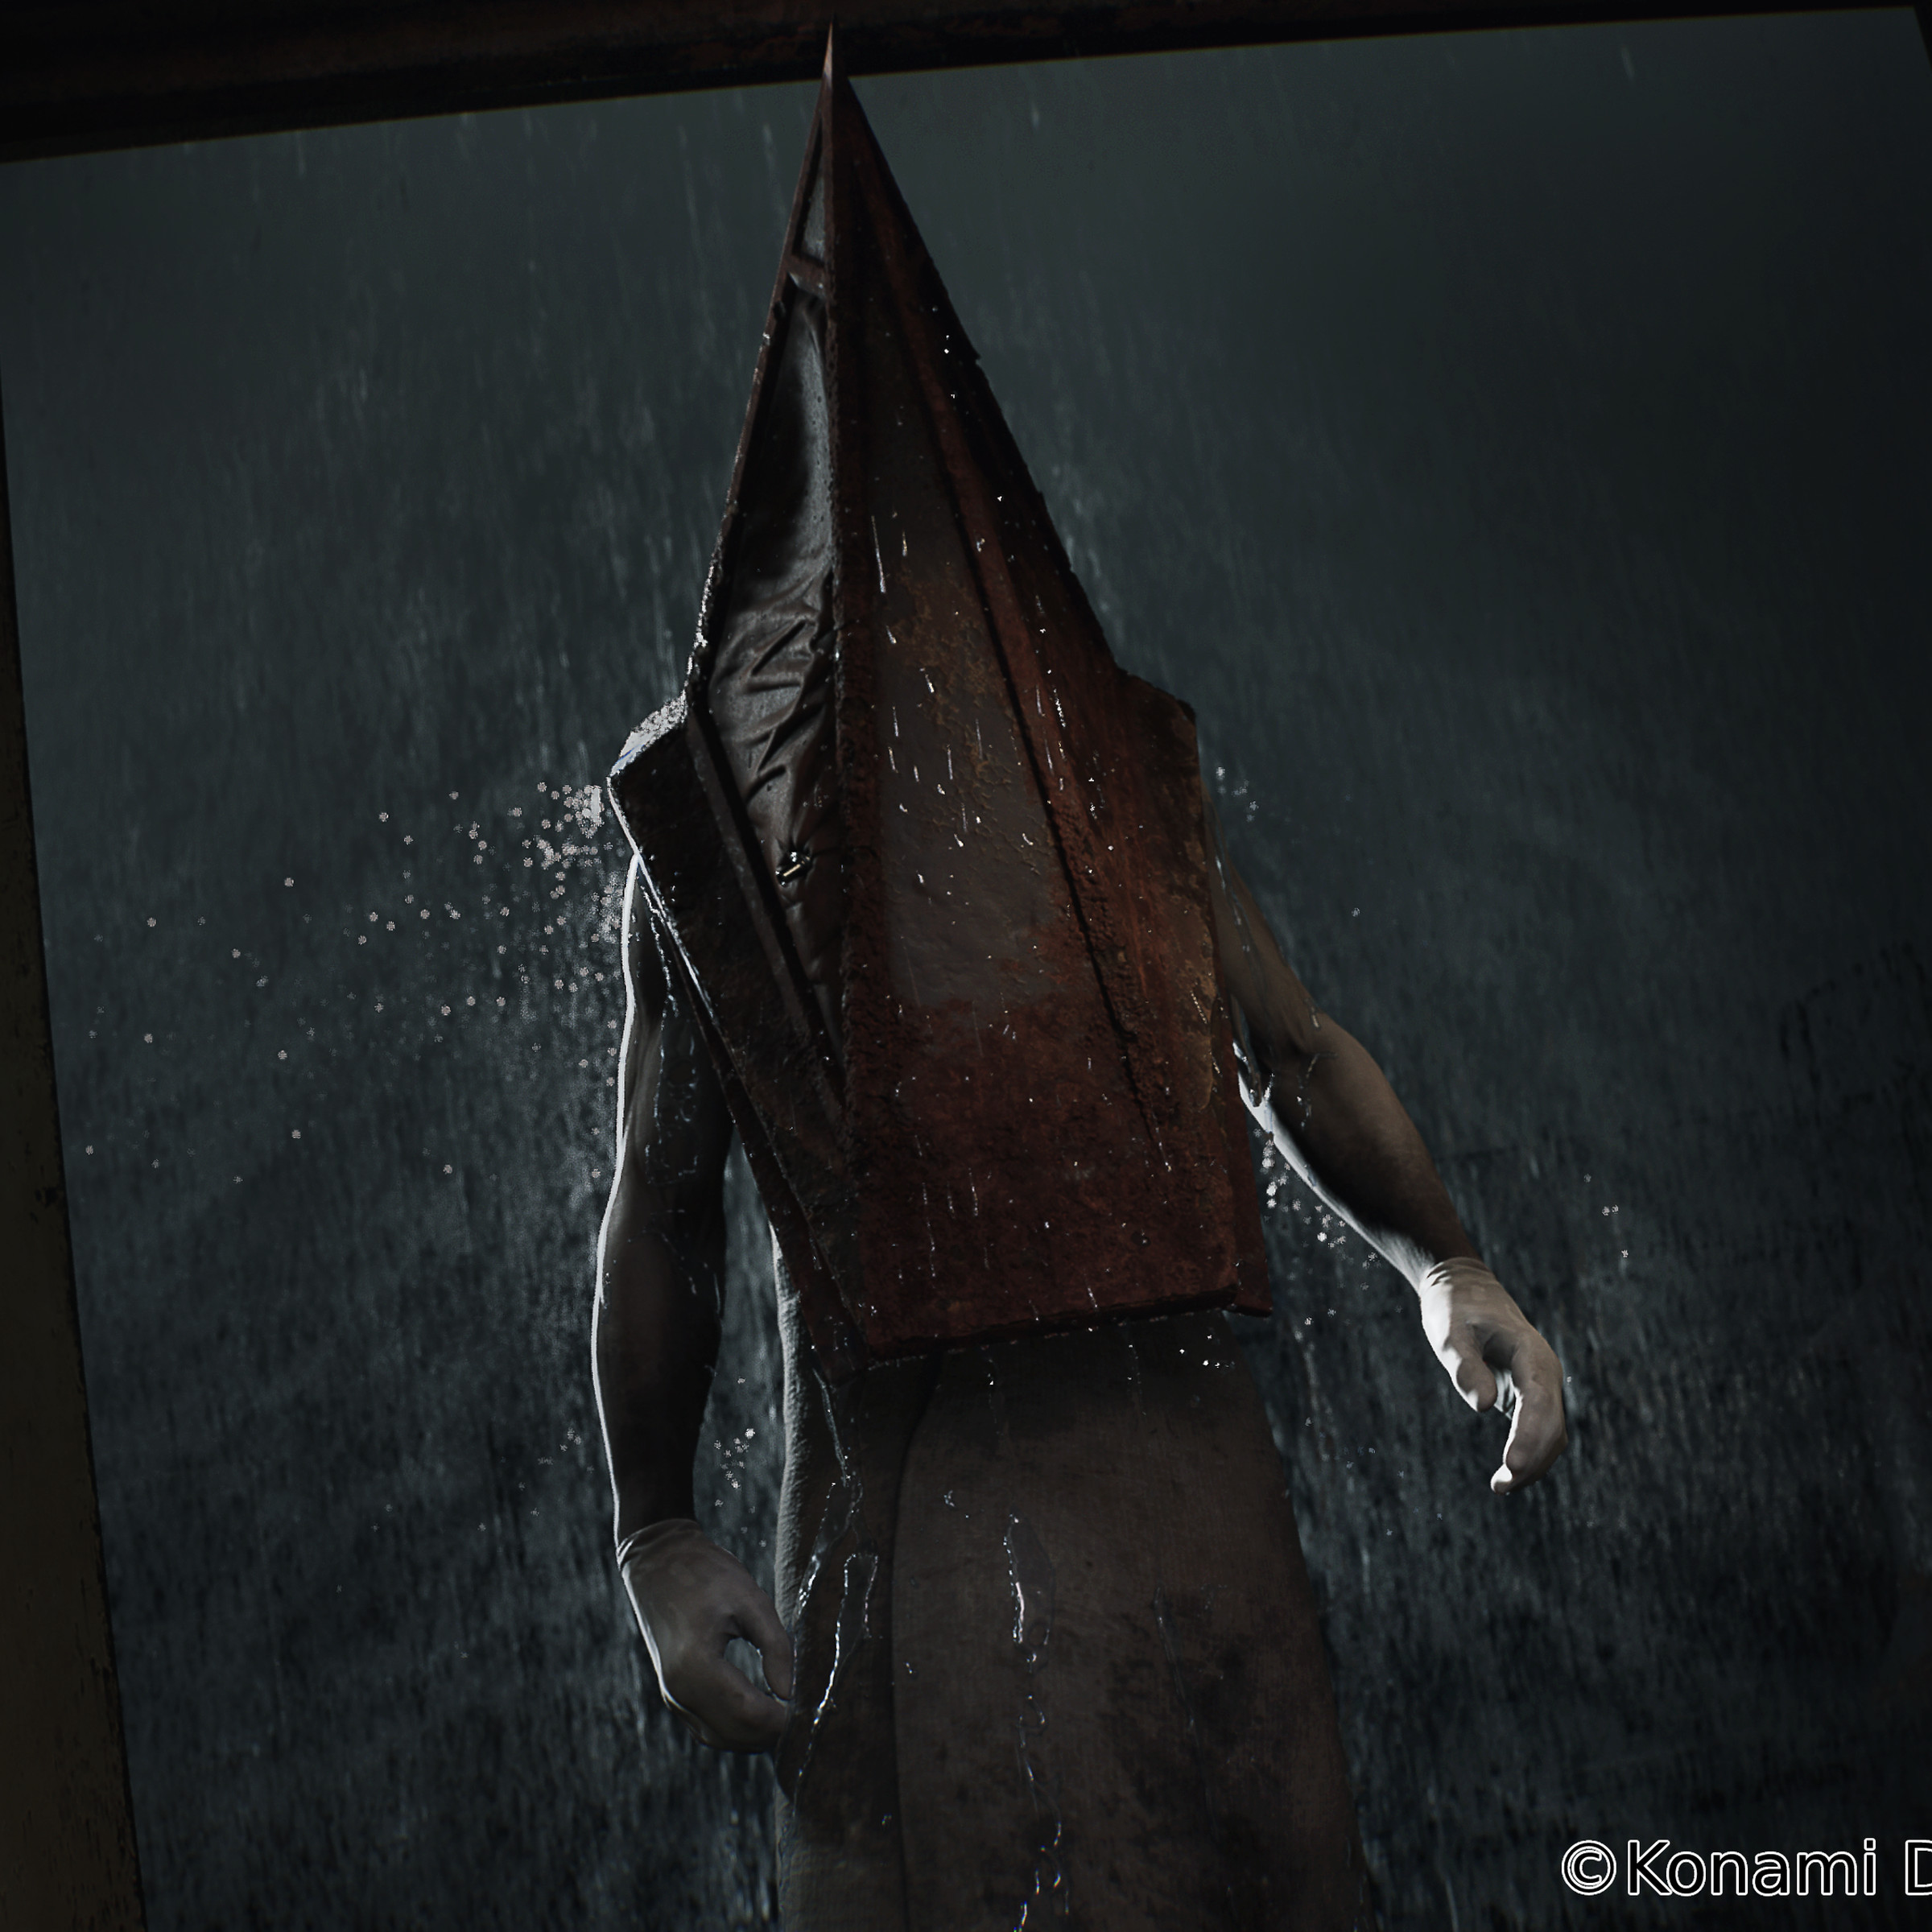 Screenshot from Silent Hill 2 featuring Pyramid Head standing in a door frame.